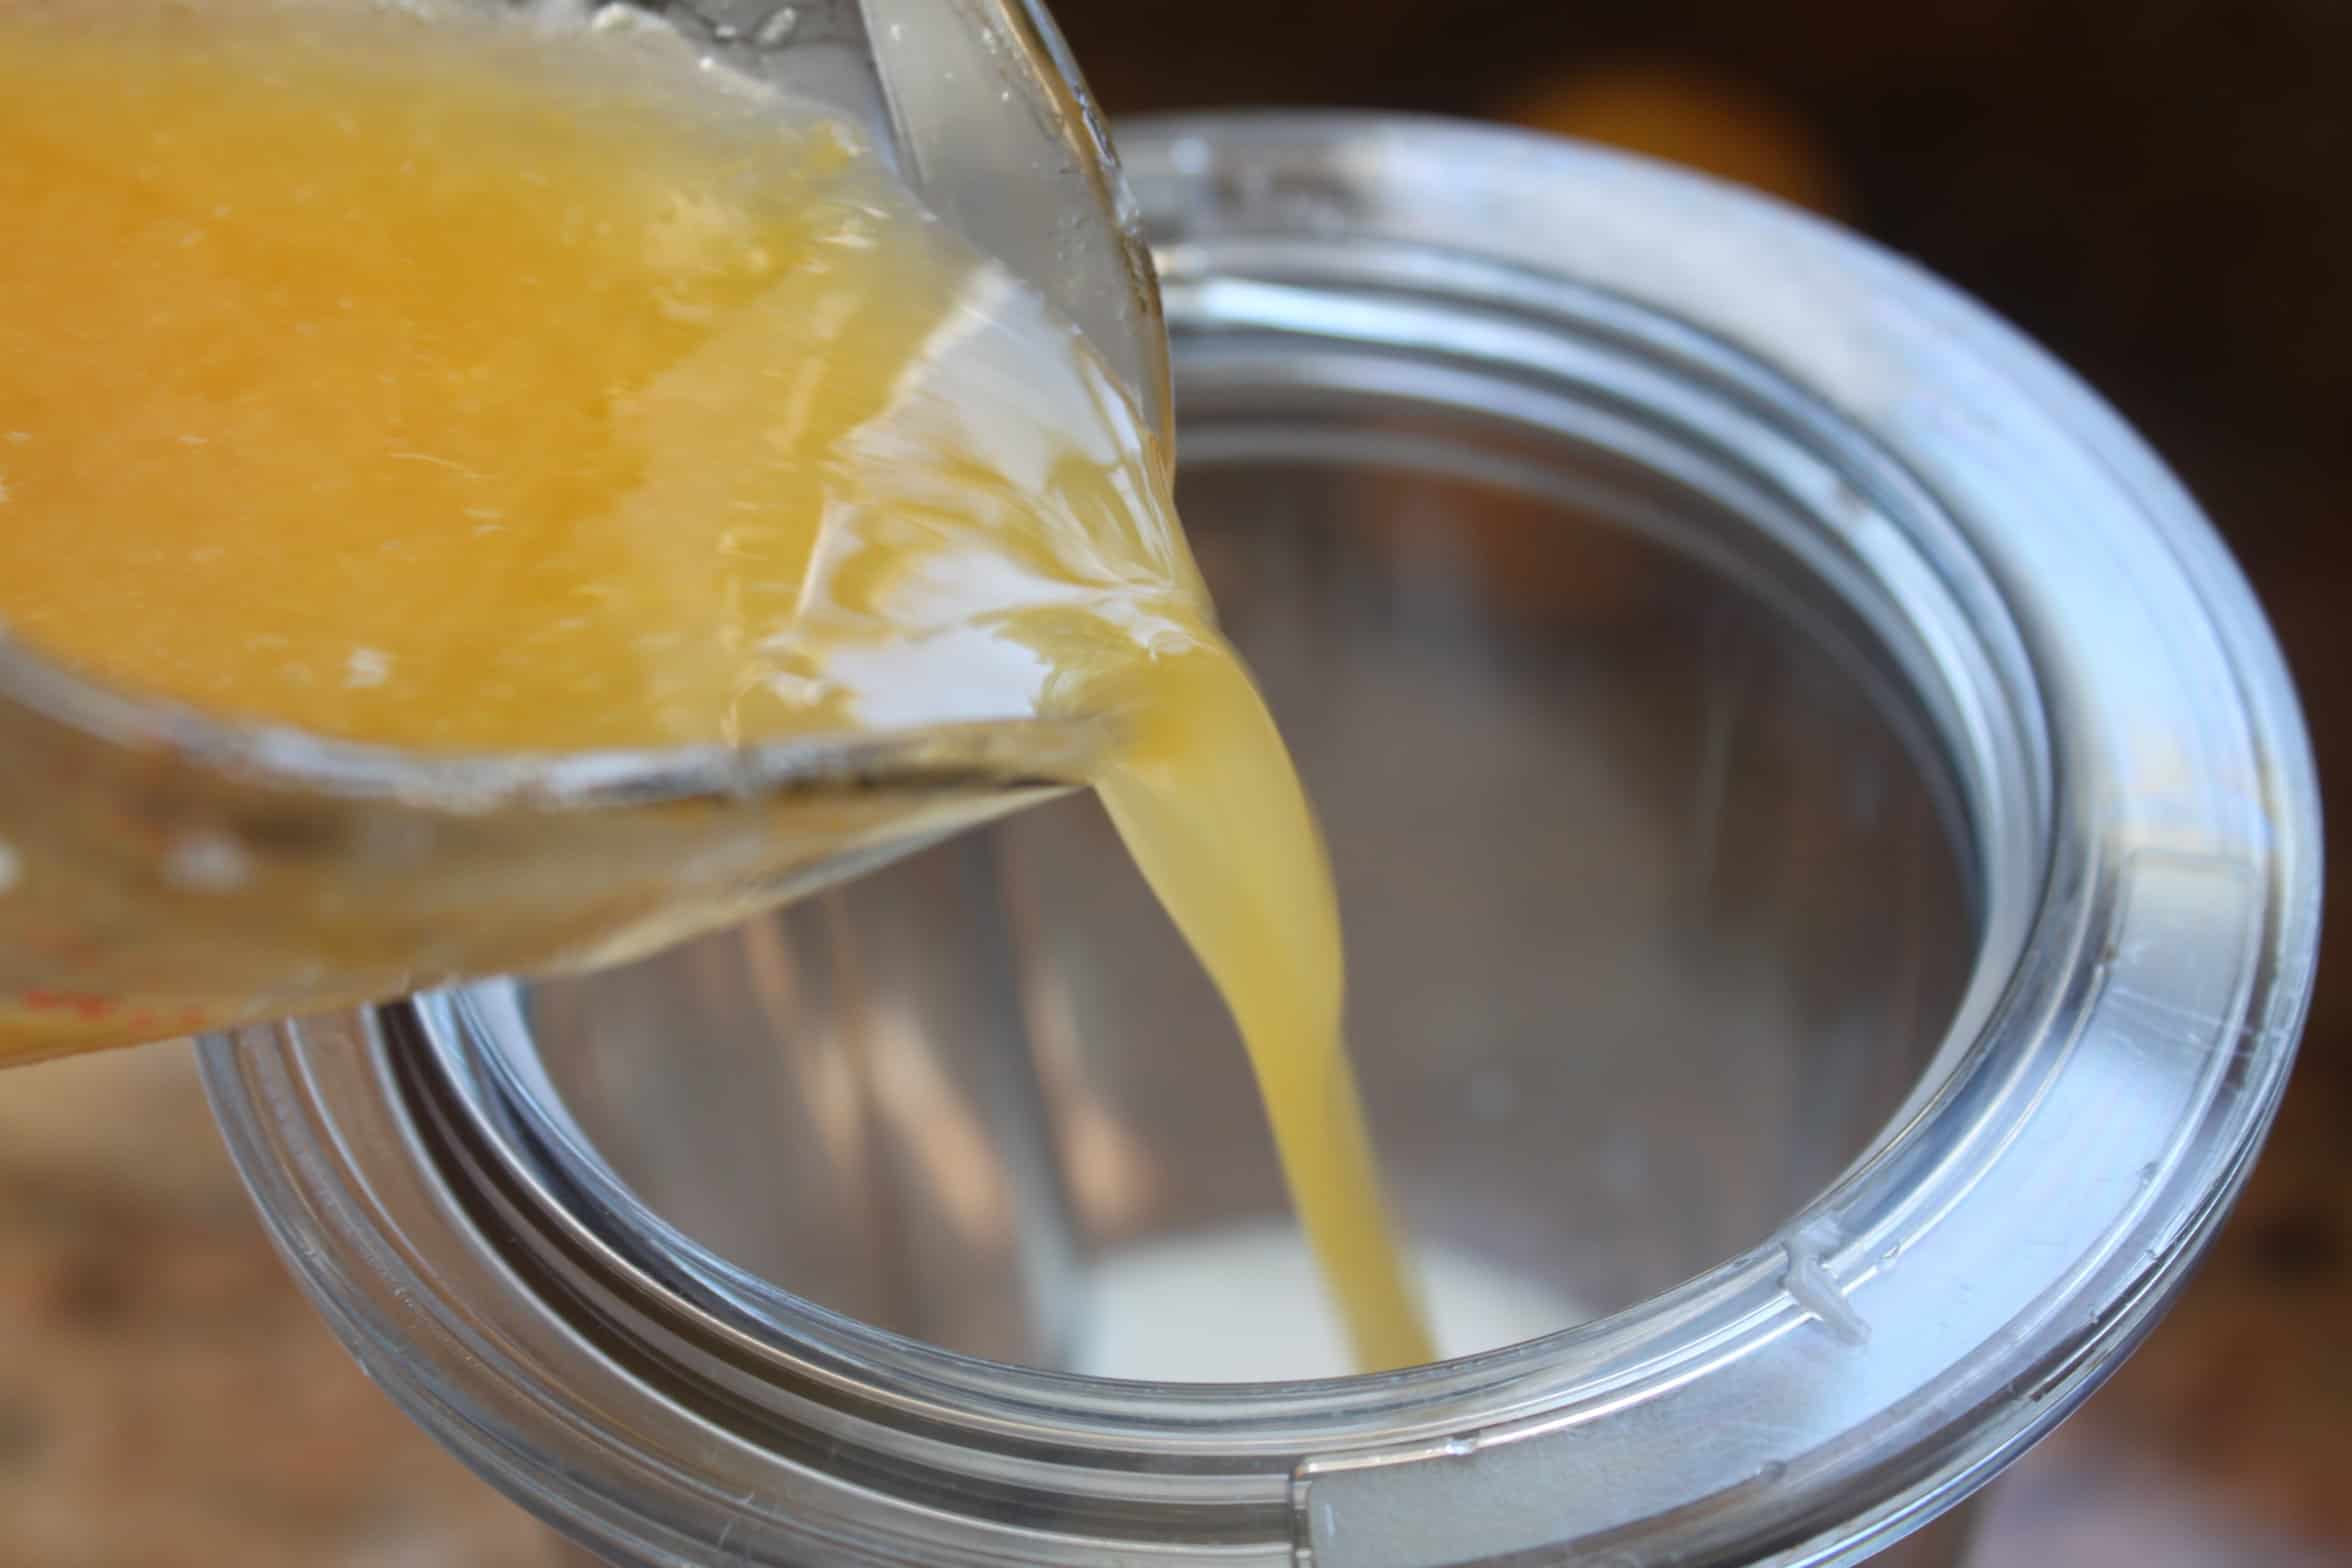 pouring orange juice into blender container